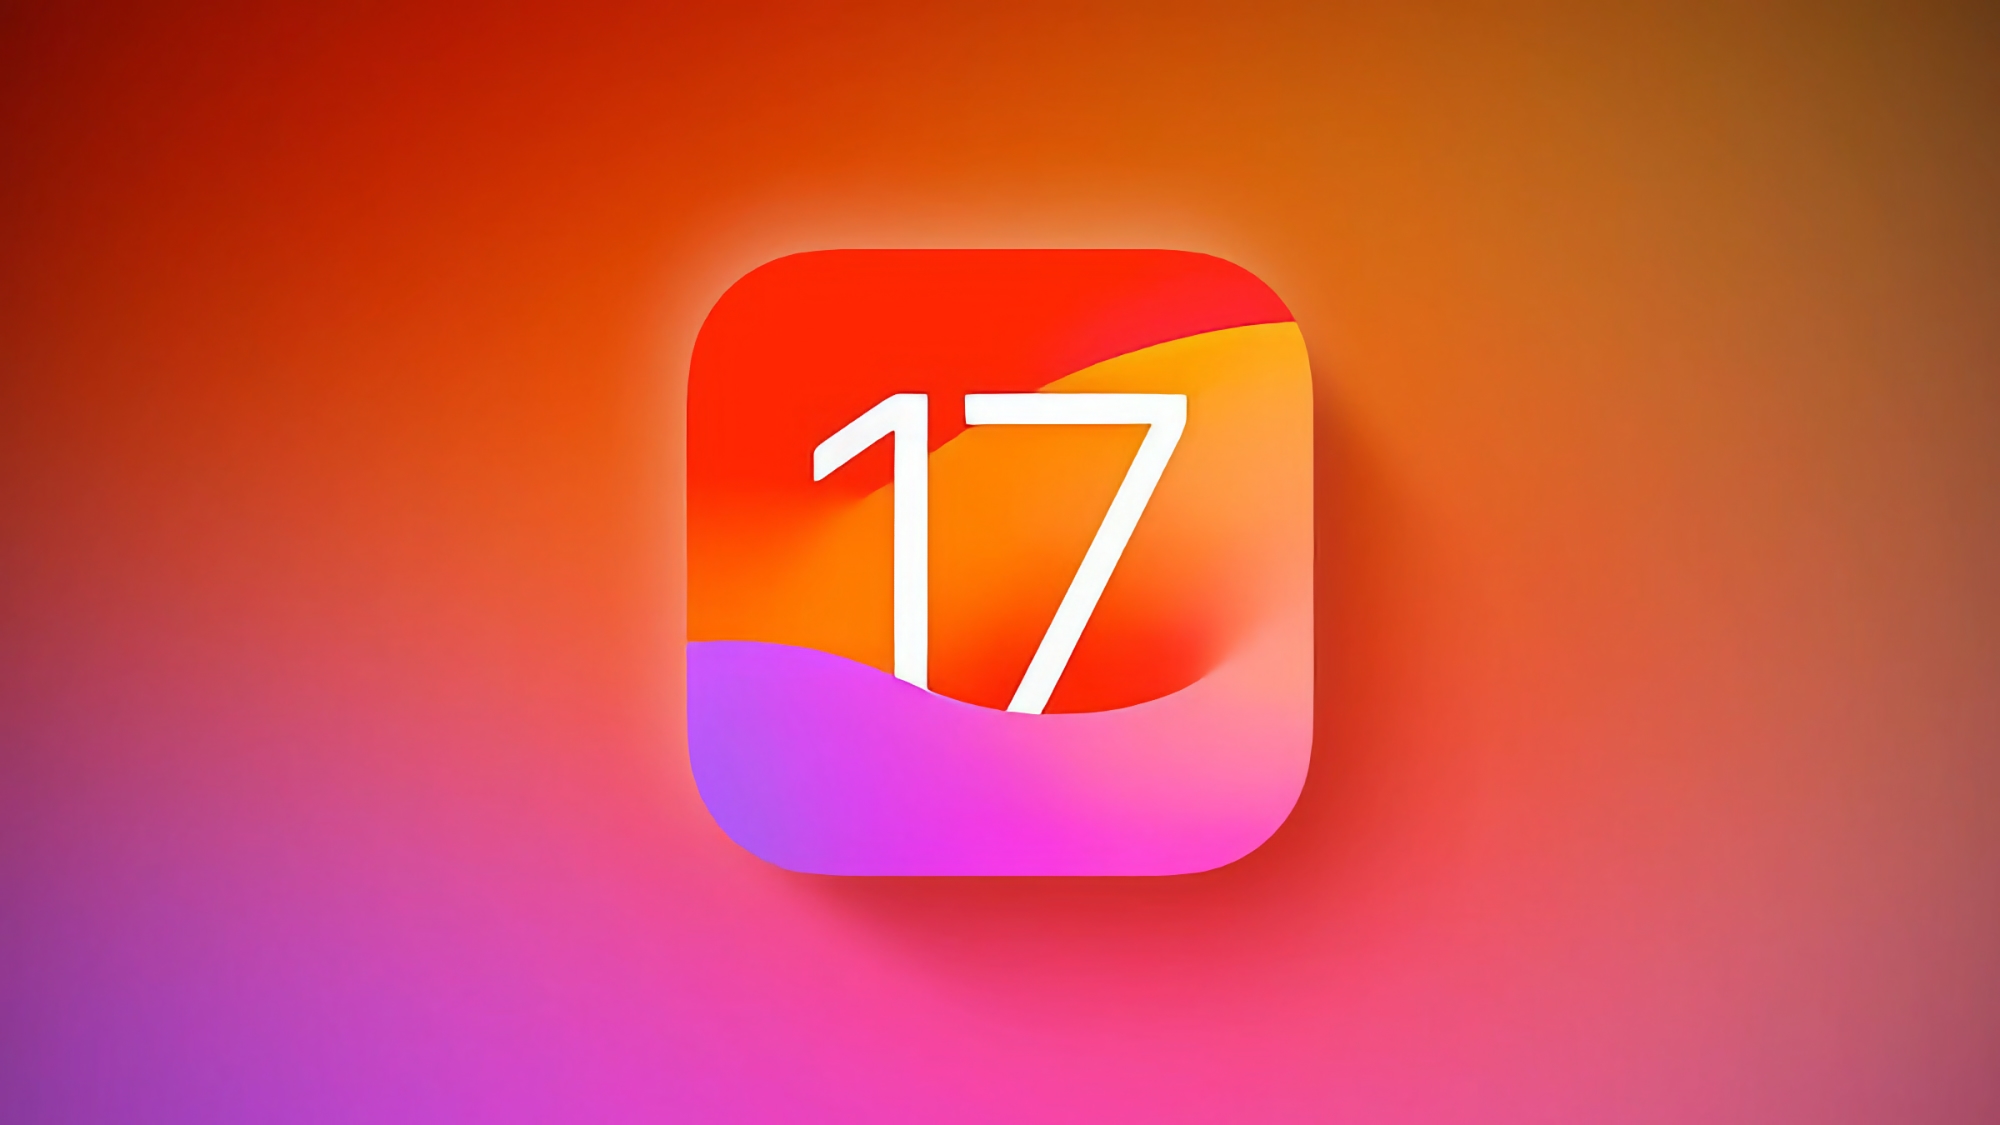 What's new in iOS 17 Beta 4